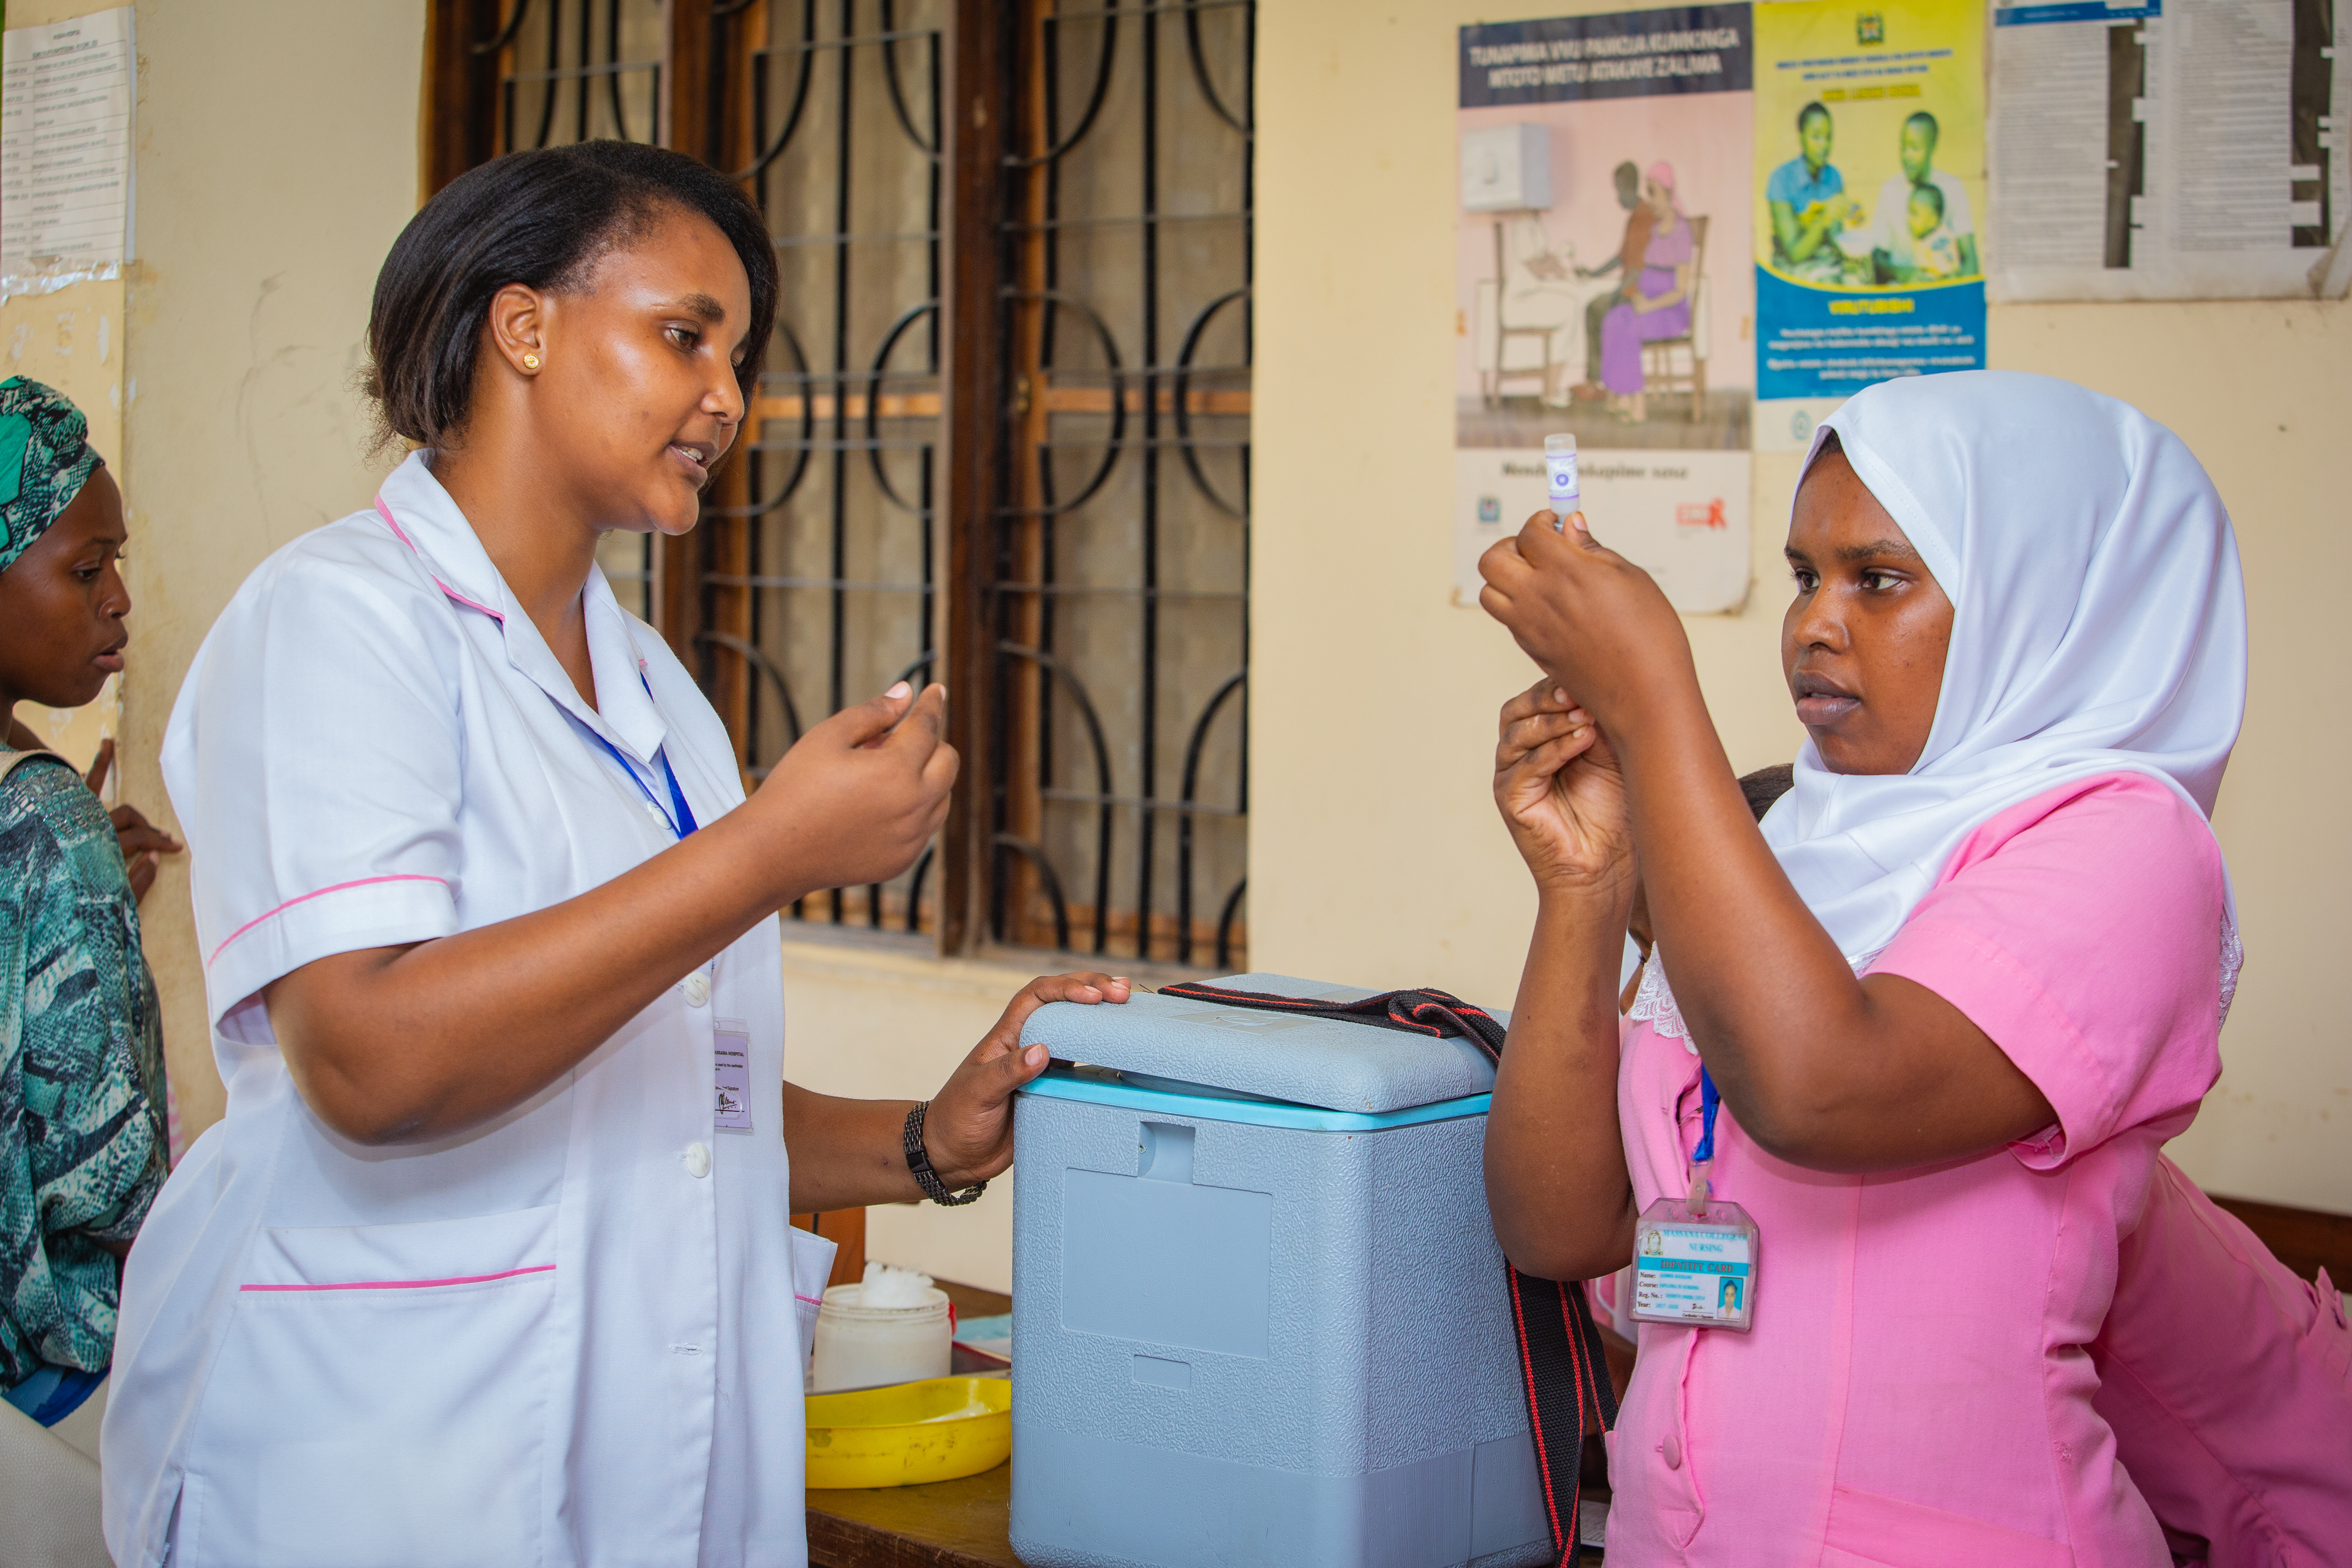  Two health workers in Tanzania.